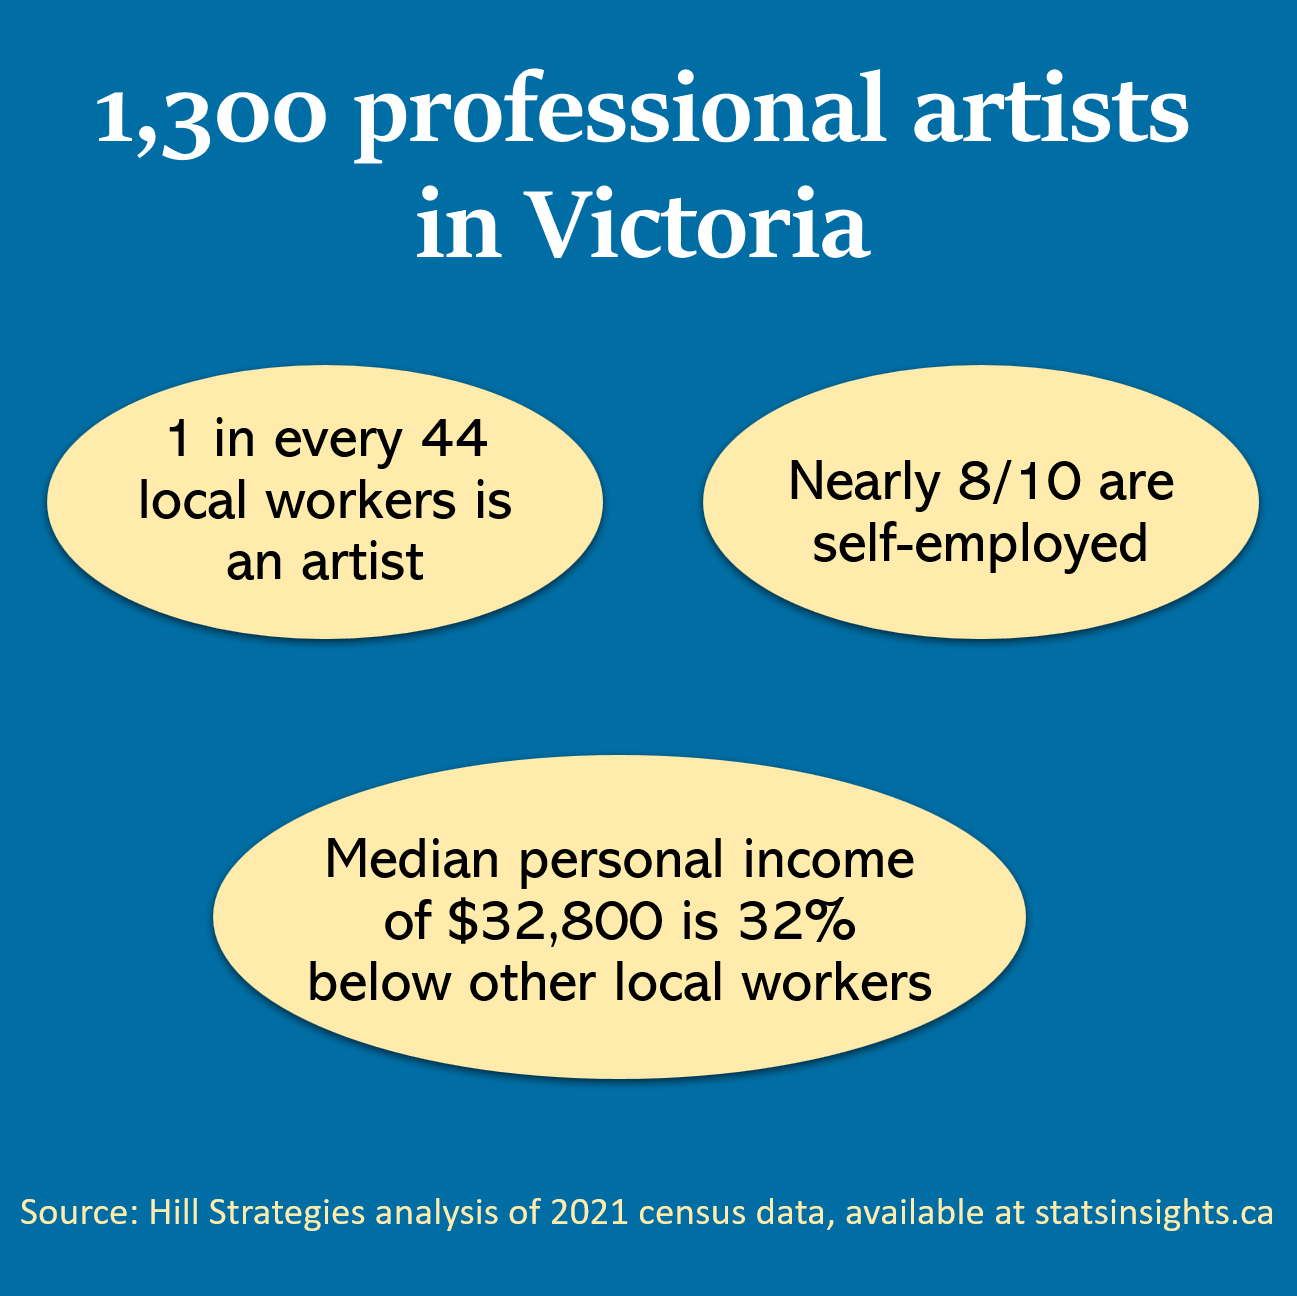 Graphic of key facts about the 1,300 professional artists in the City of Victoria, British Columbia. 1 in every 44 local workers is a professional artist. Nearly 8/10 are self-employed. Median personal income of $32,800 is 32% lower than other local workers. Source: Hill Strategies analysis of 2021 census data at http://www.statsinsights.ca.